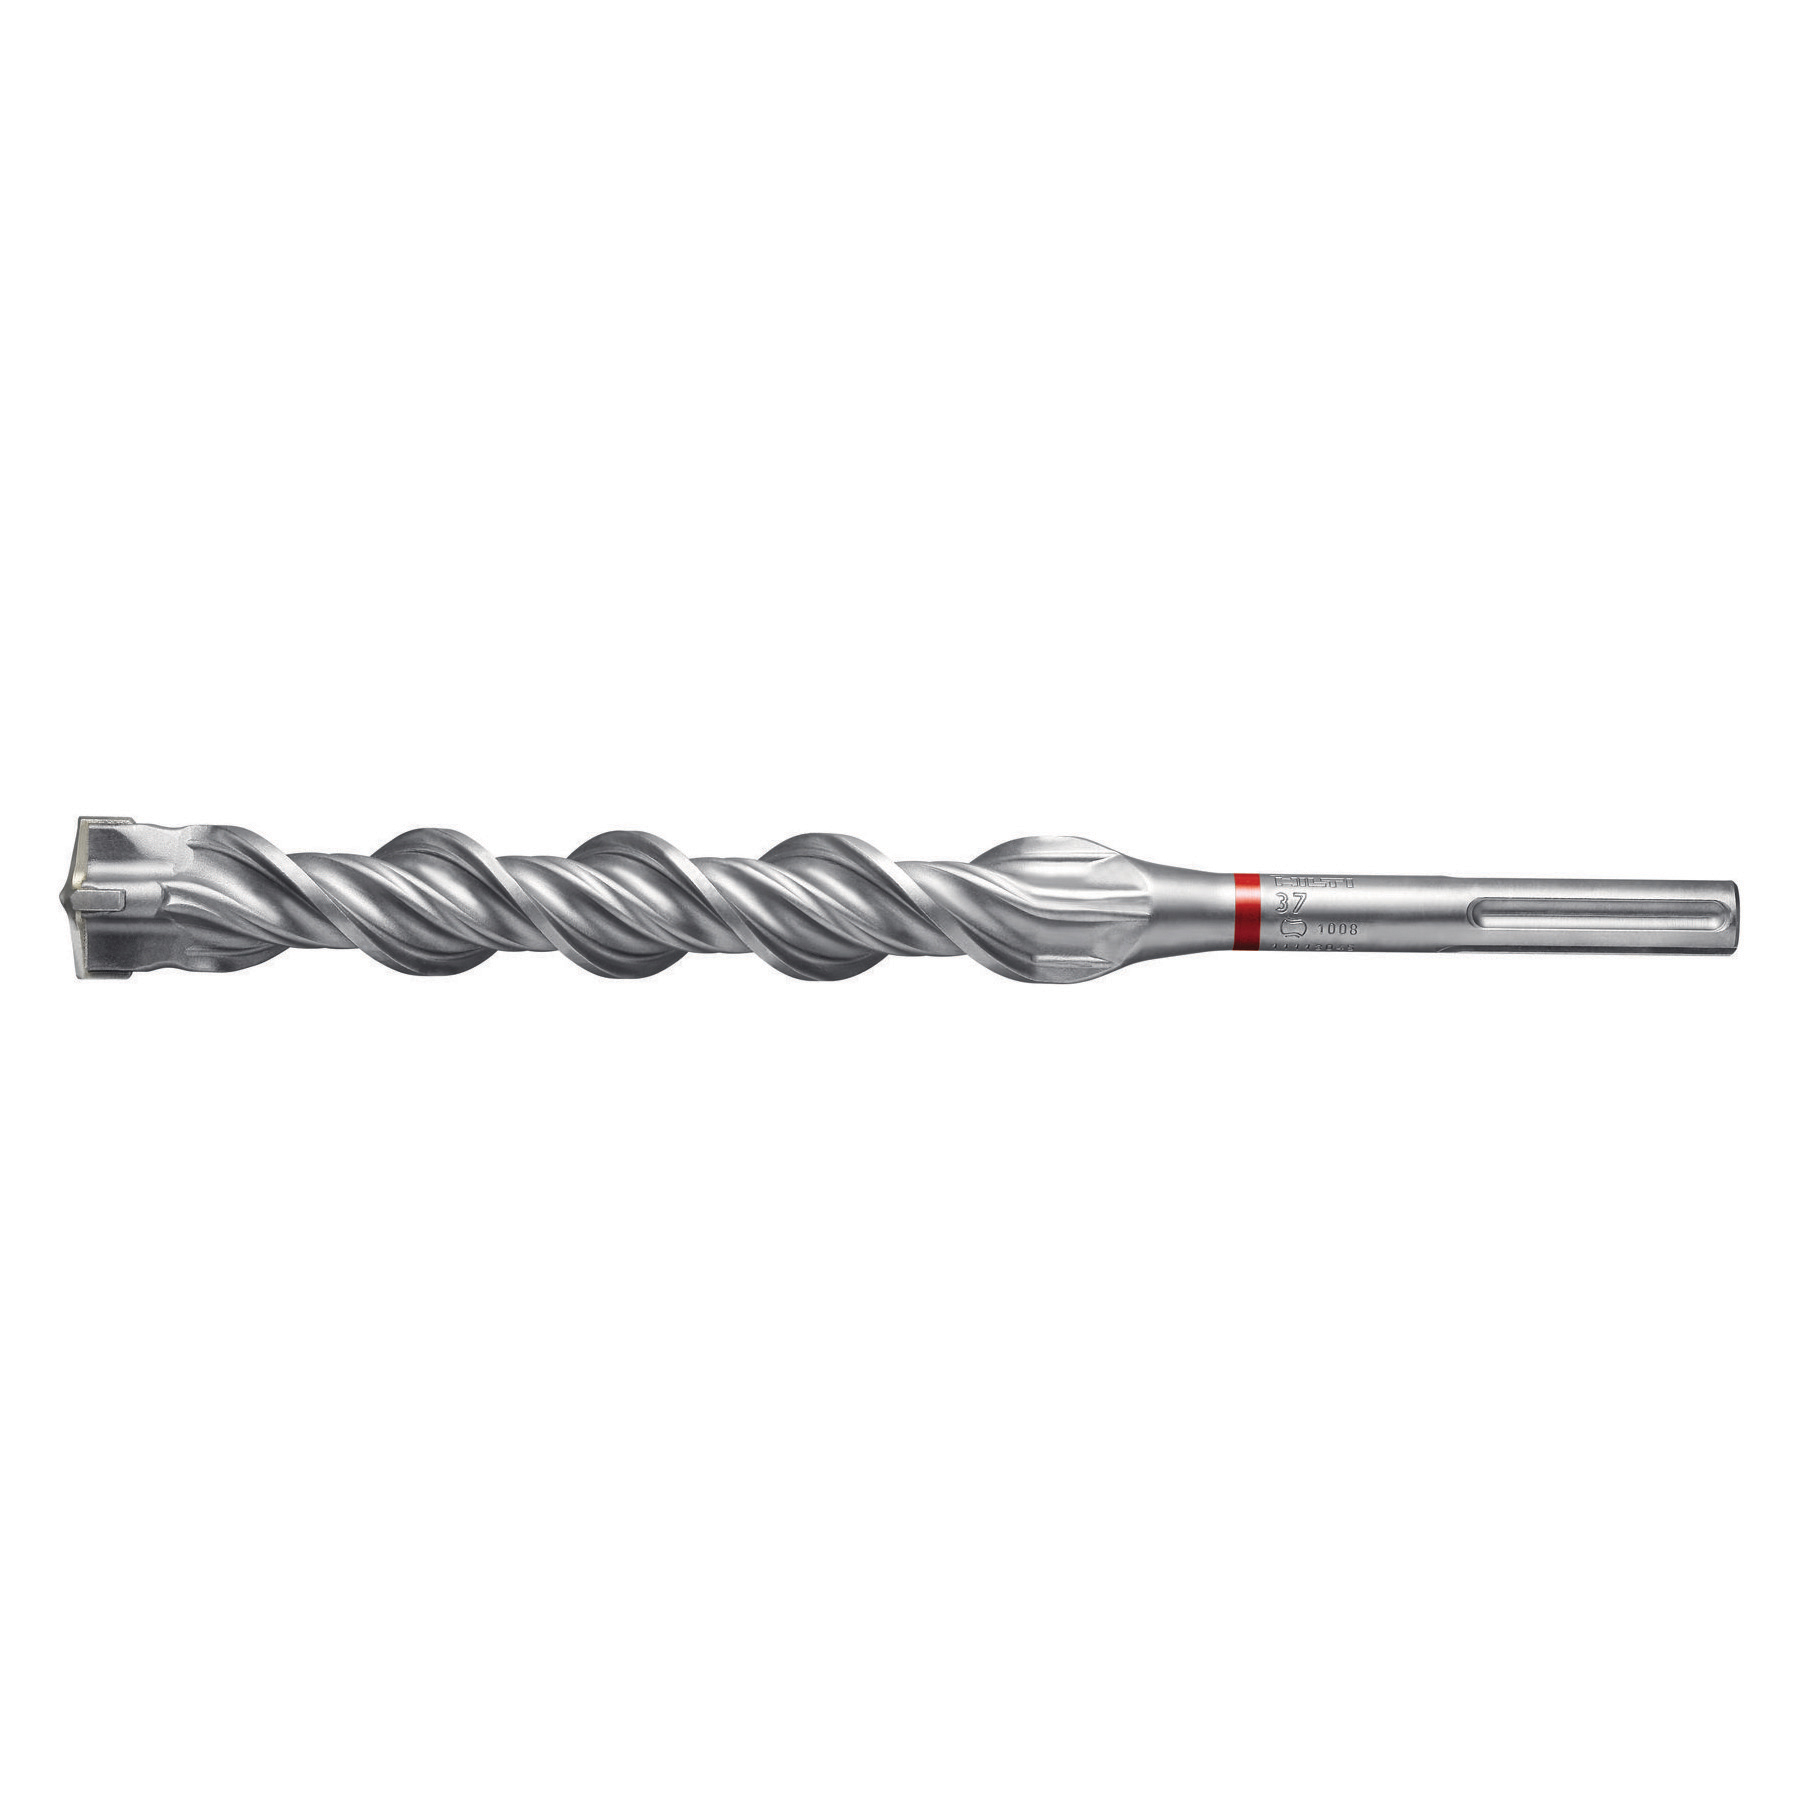 HILTI 282513 KB3 Standard Expansion Wedge Anchor, 5/8 in Dia, 3-3/4 in OAL, 1-1/2 in L Thread, Steel, Zinc Plated